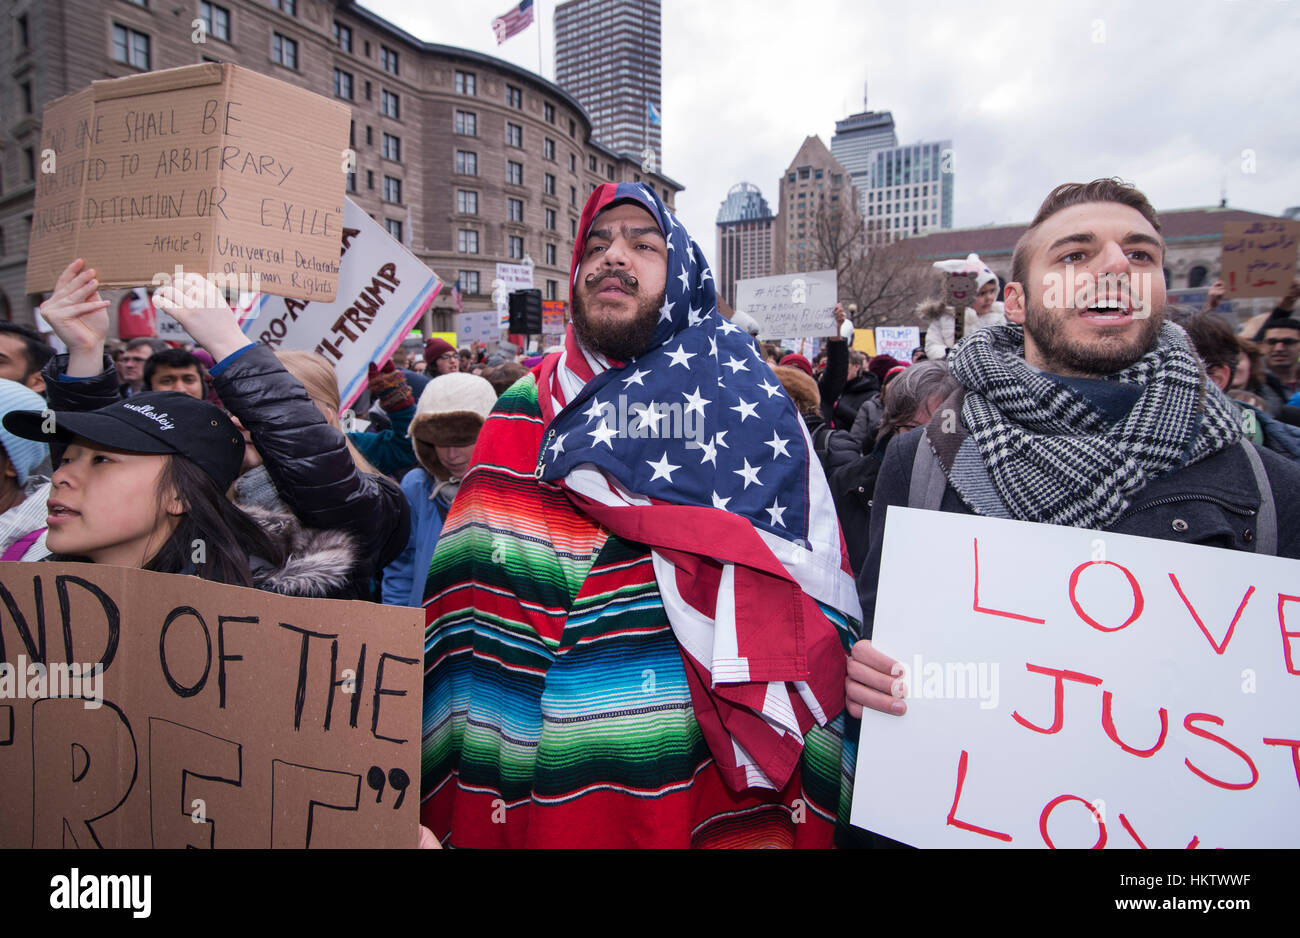 Boston, Massachusetts, USA. 29th January, 2017.  More than 20,000 demonstrators filled Copley Square in central Boston protesting President Donald Trump’s executive order stopped immigration from Iran, Iraq, Yemen, Somalia, Sudan, Libya and Syria to the United States.  Photo shows Izzy a 39 year-old American Citizen of Port Rican and Mexican decent wearing and American flag and a Mexican serape.   The demonstration in Copley Square was organized by the Massachusetts branch of the Council on American-Islamic Relations, CAIR.  Credit: Chuck Nacke/Alamy Live News Stock Photo